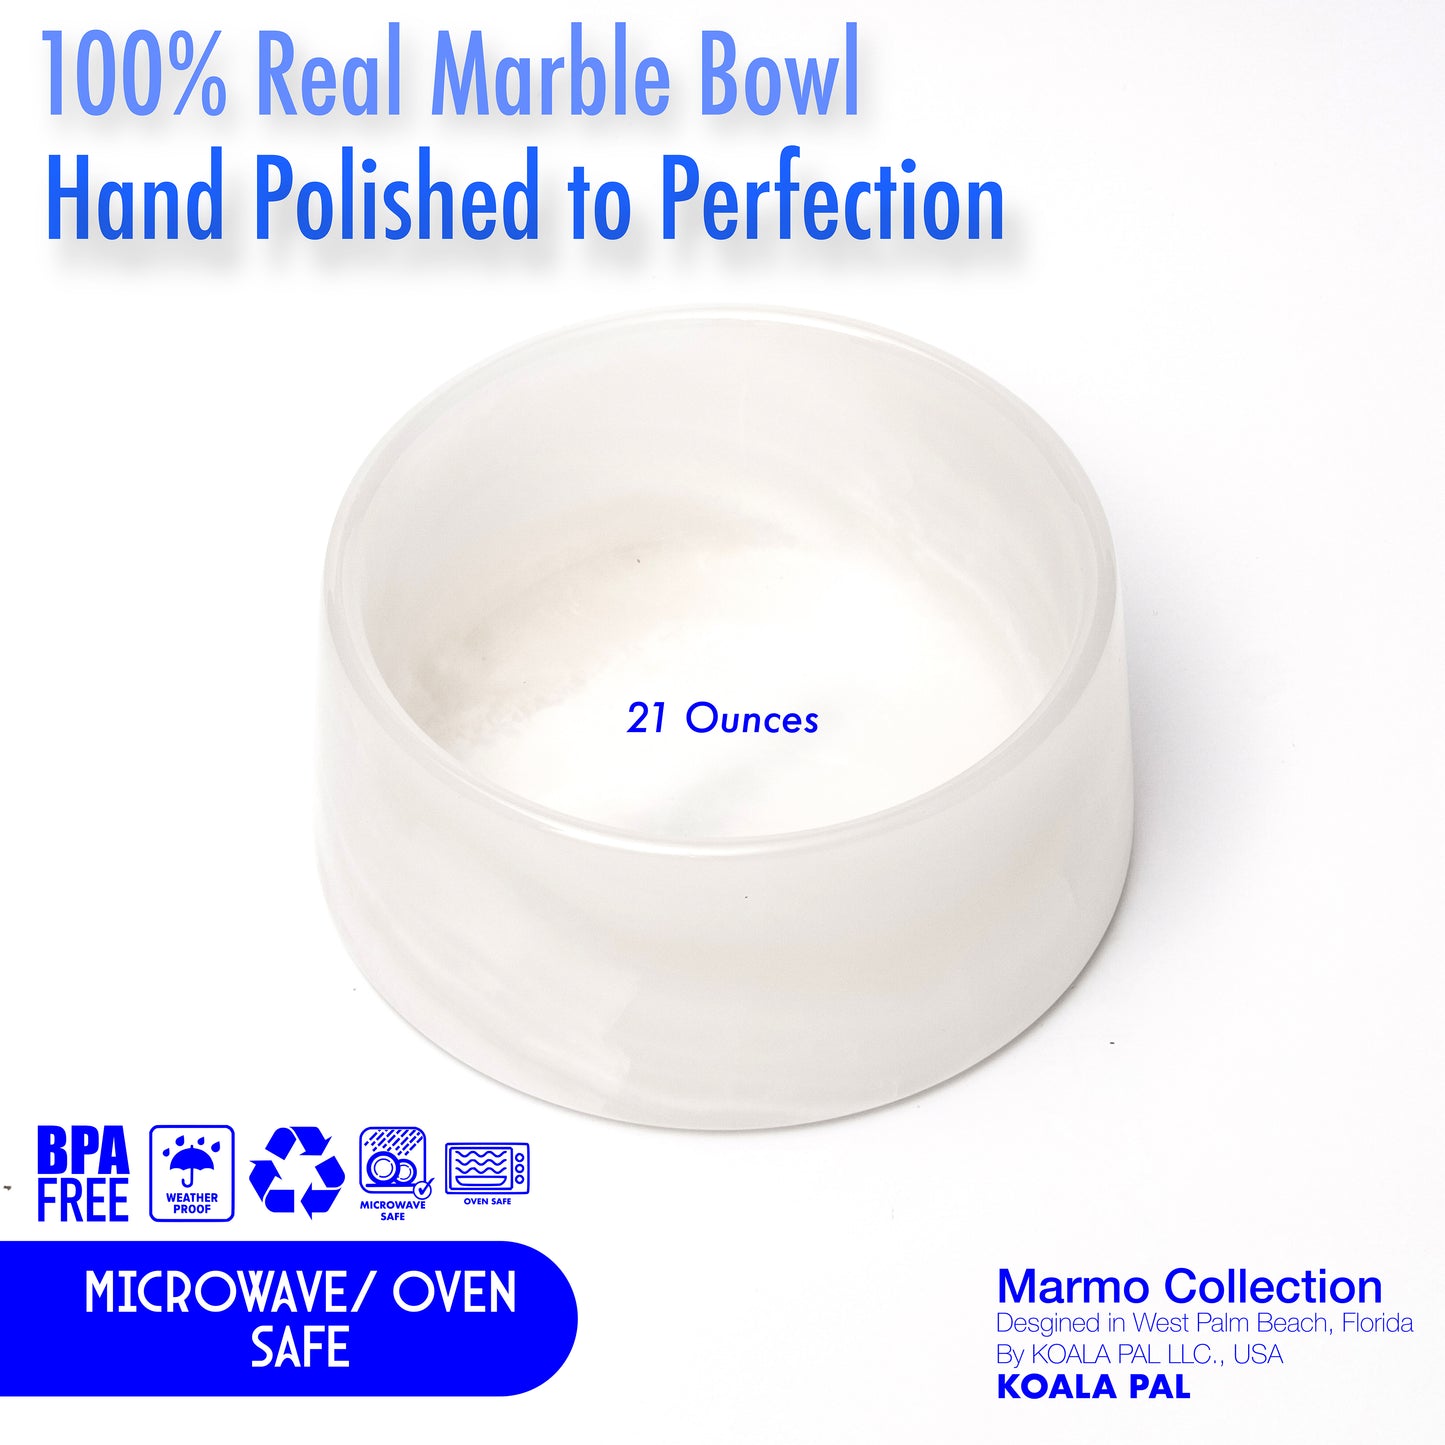 Marmo Collection - 100% Real Marble Pet Bowl